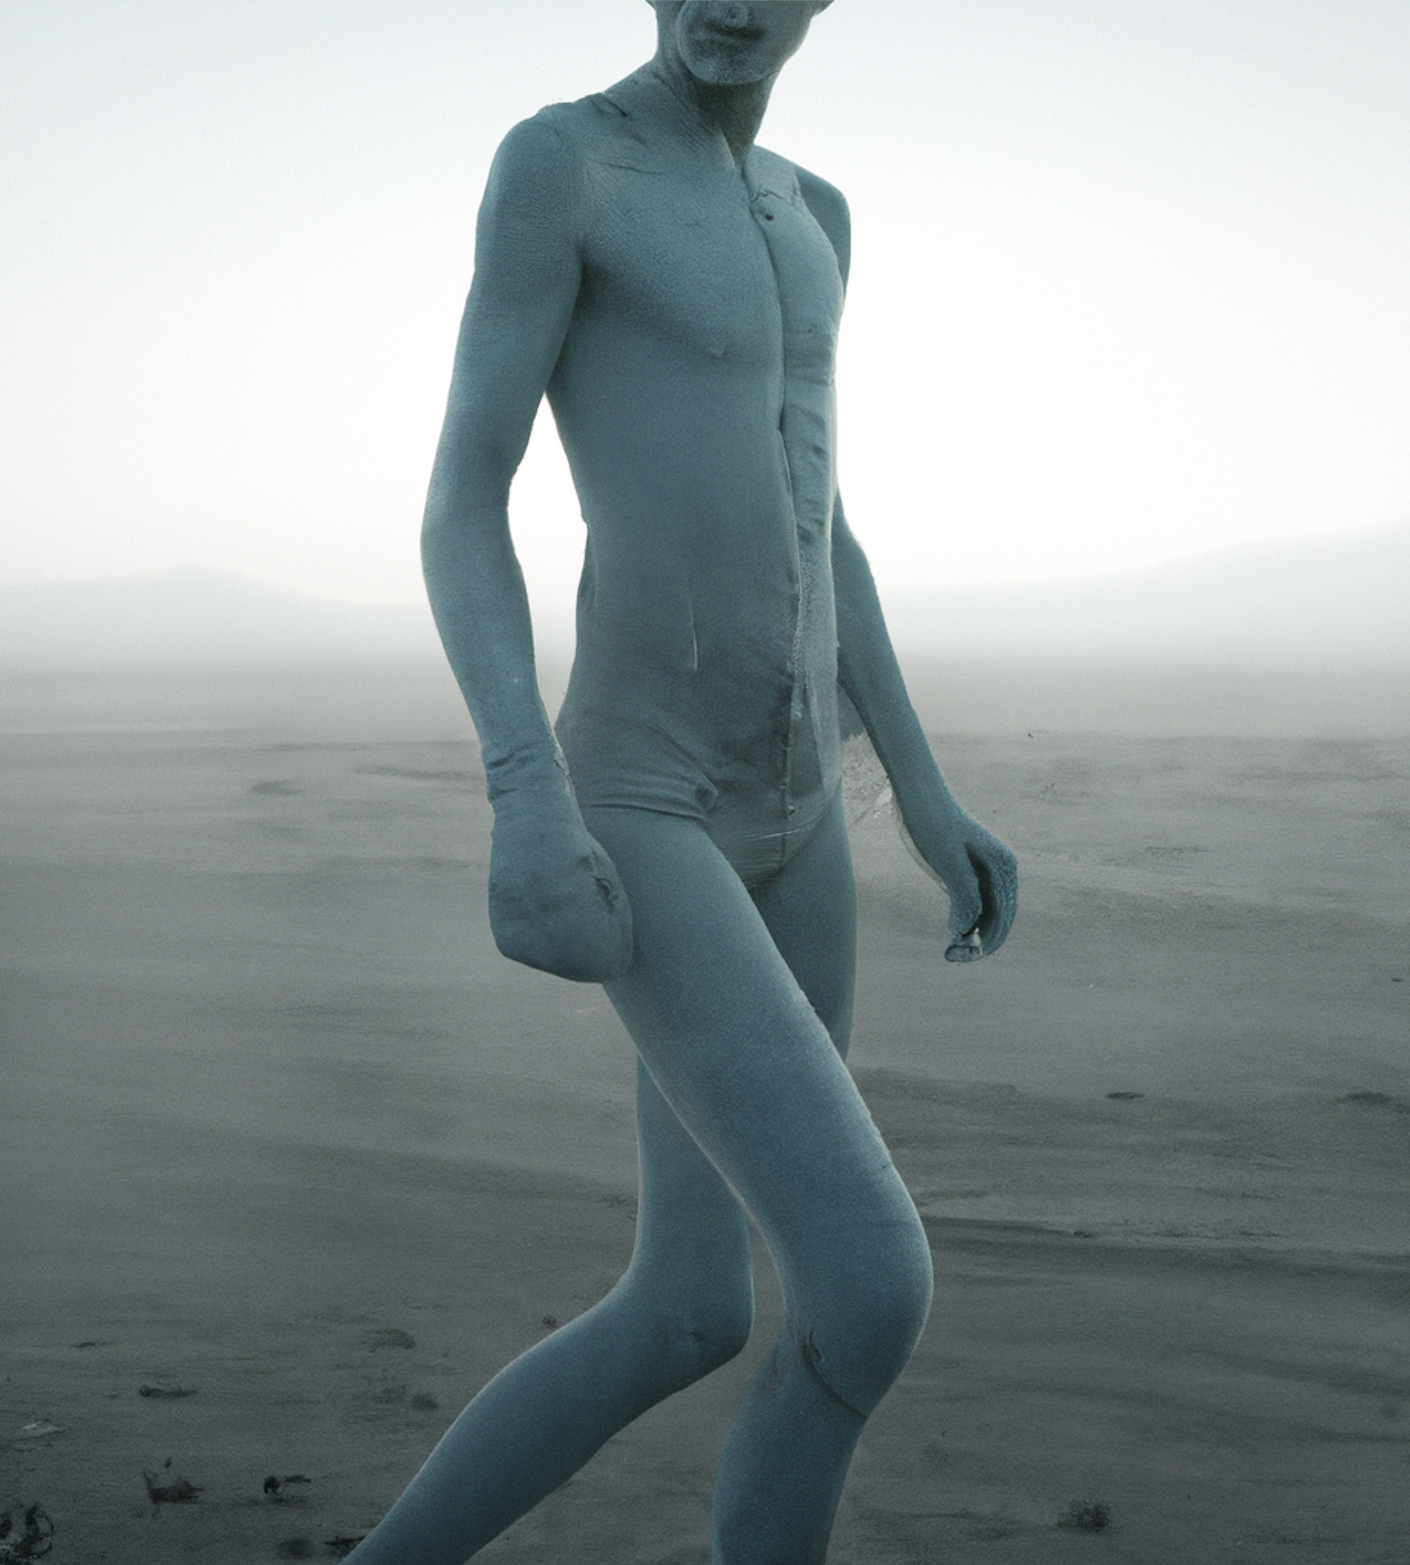 A humanoid figure seen from the chin down, cast in a uniform bluish gray, walks through a colorless desertscape